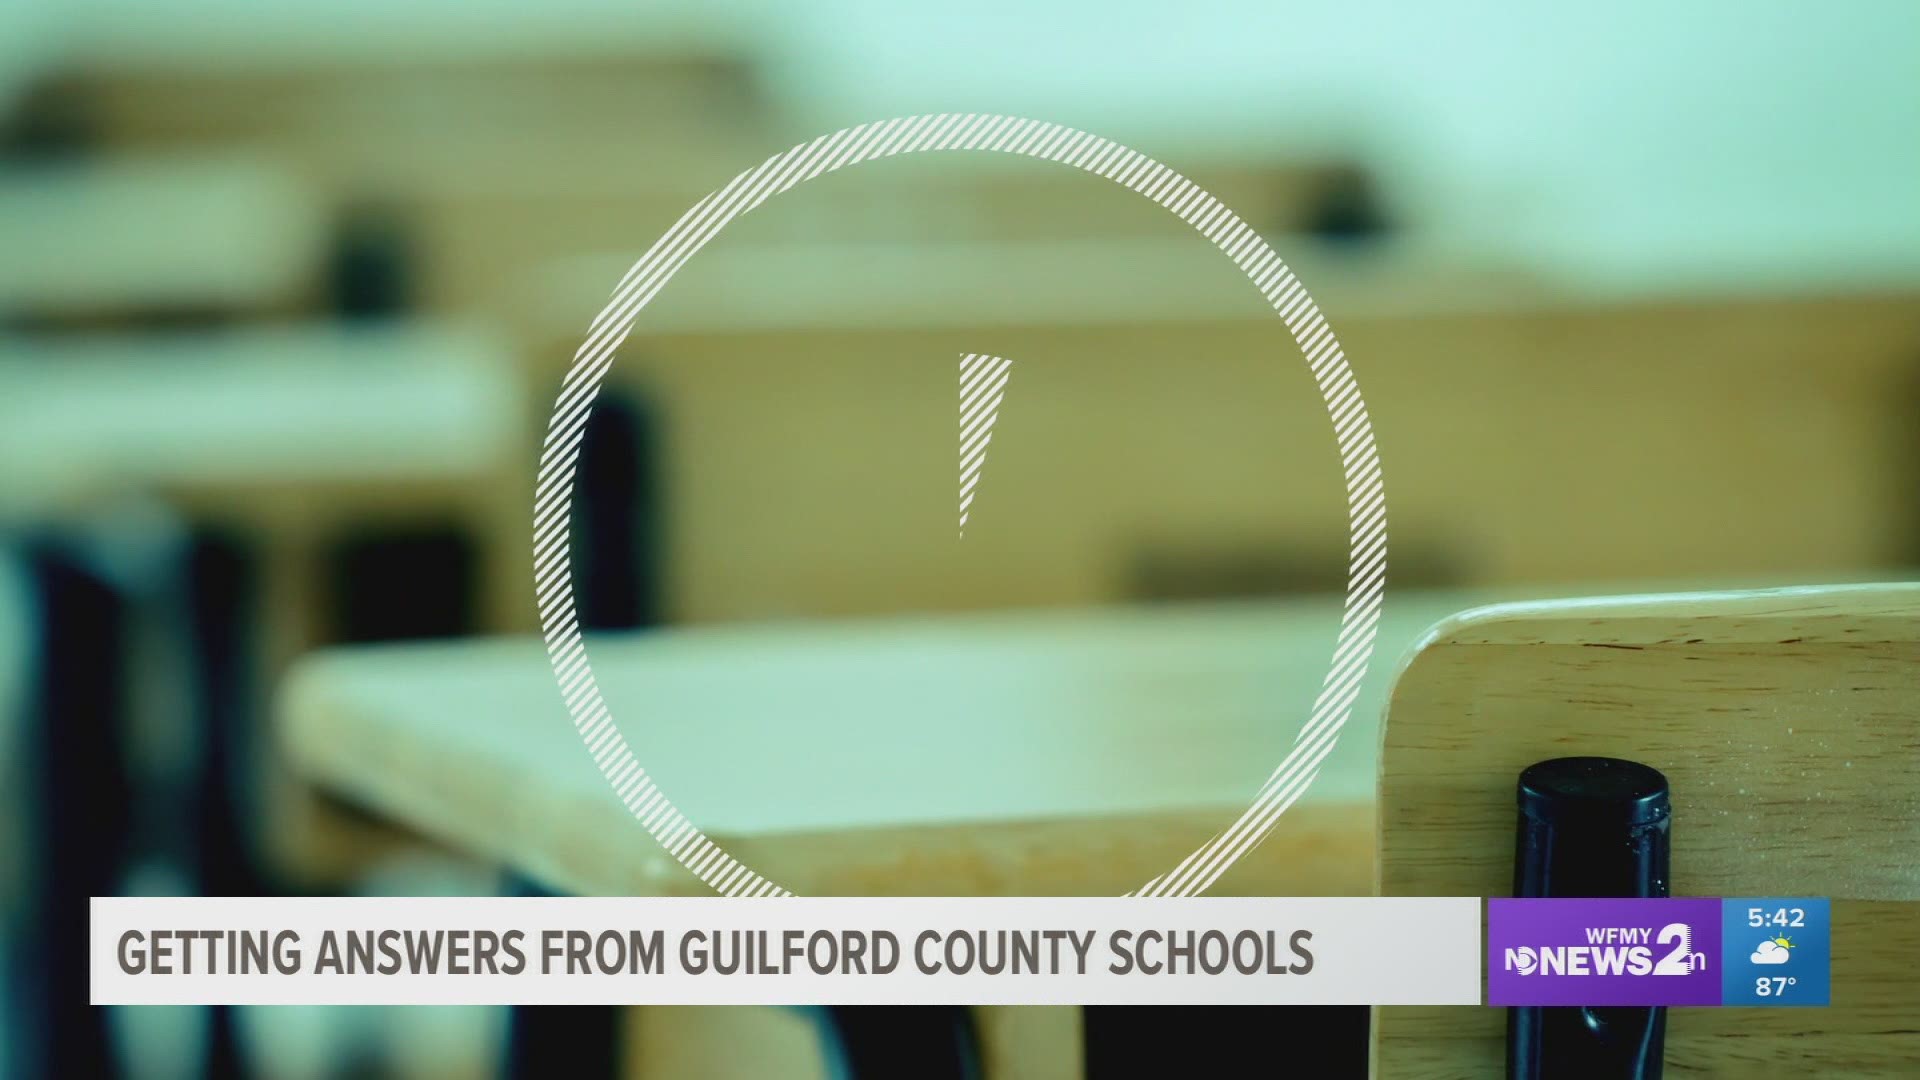 Guilford County Schools leaders answer your questions on what to expect for next school year during the coronavirus pandemic.